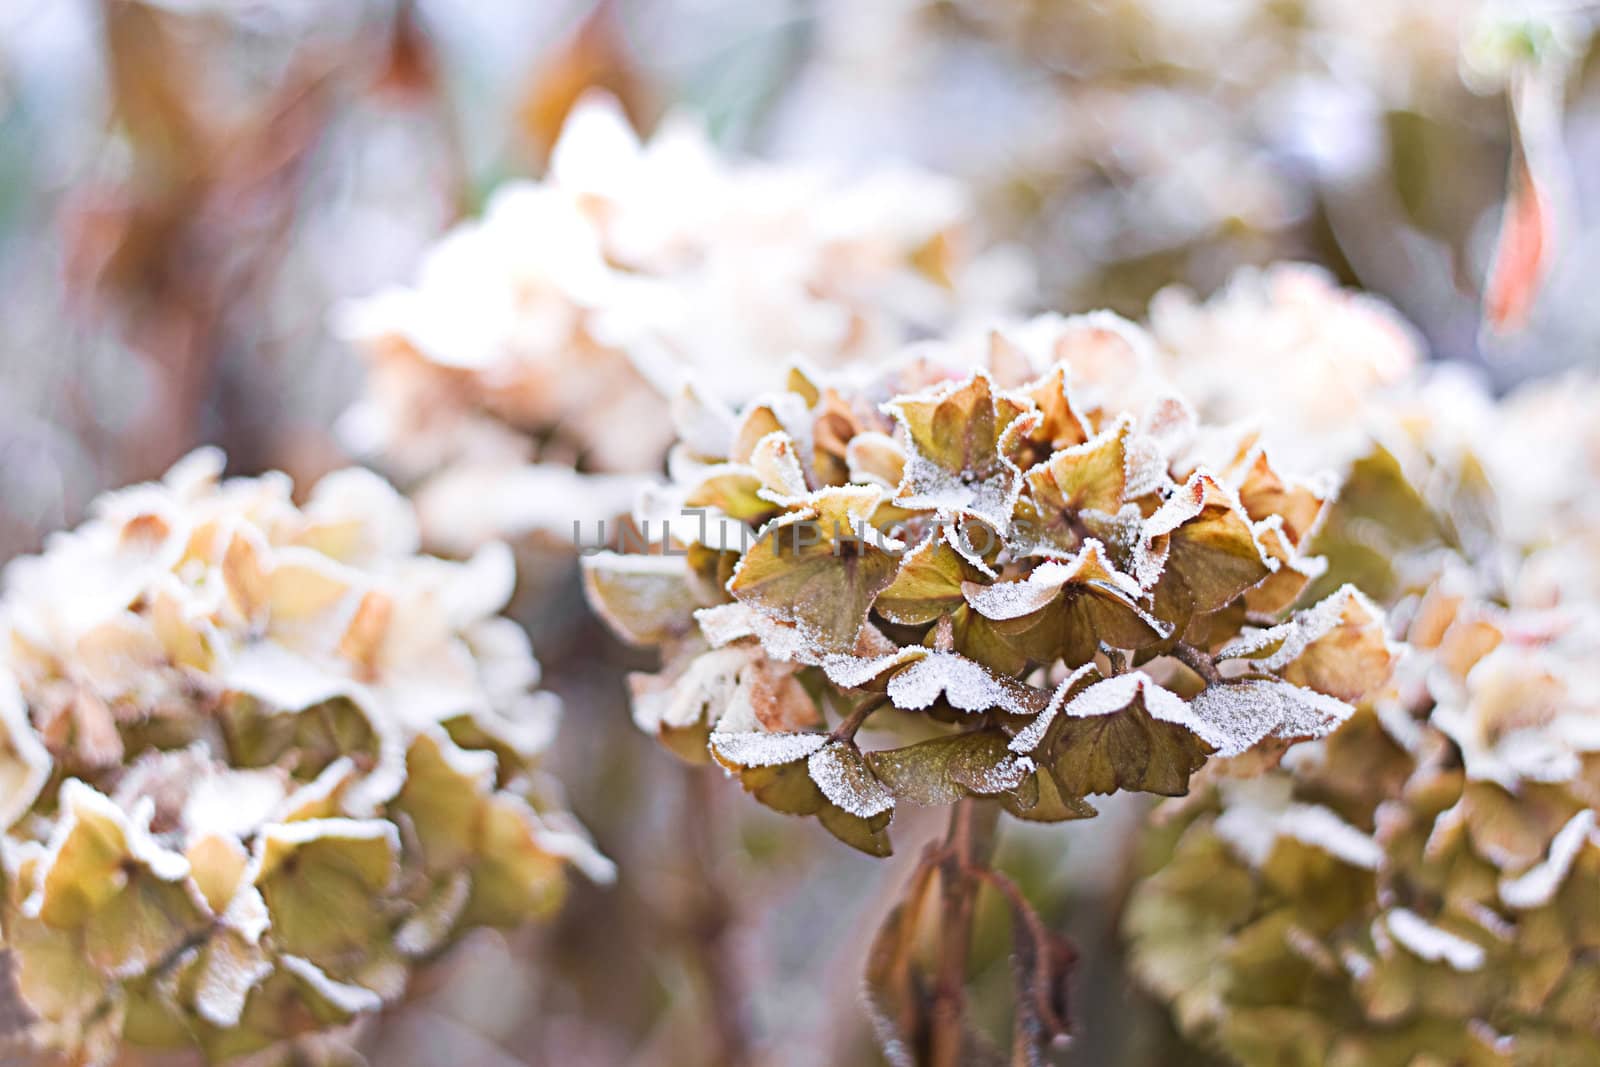 The icy flowers of the winter by Colette